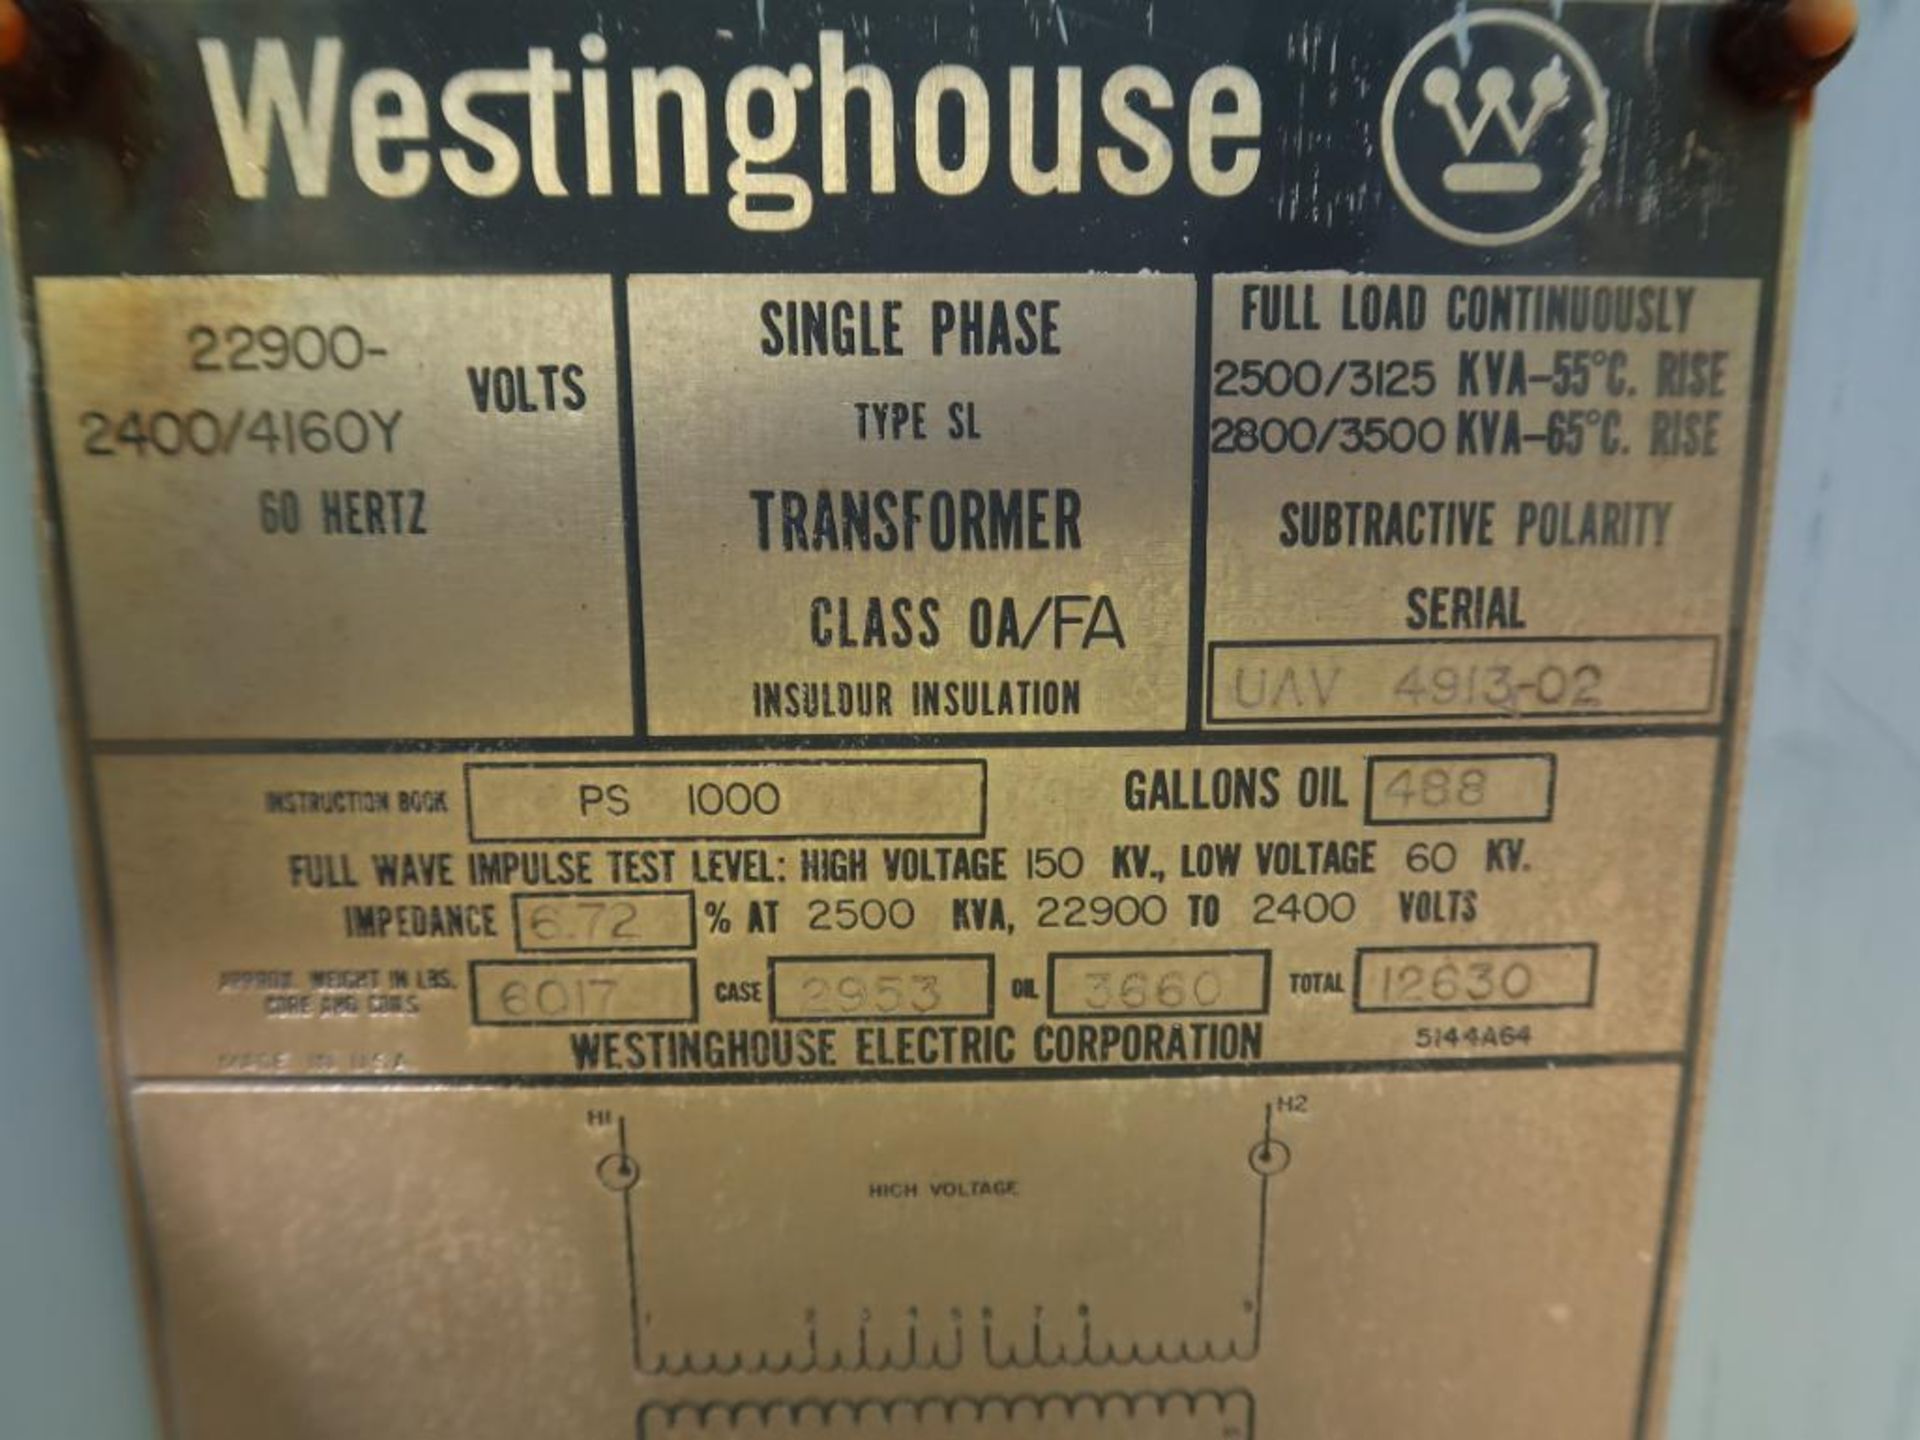 LOT: (3) Westinghouse Single-Phase Type SL Transformers, Class OA/FA, 22,900 Volts, 2400/4160Y, S/Ns - Image 2 of 2